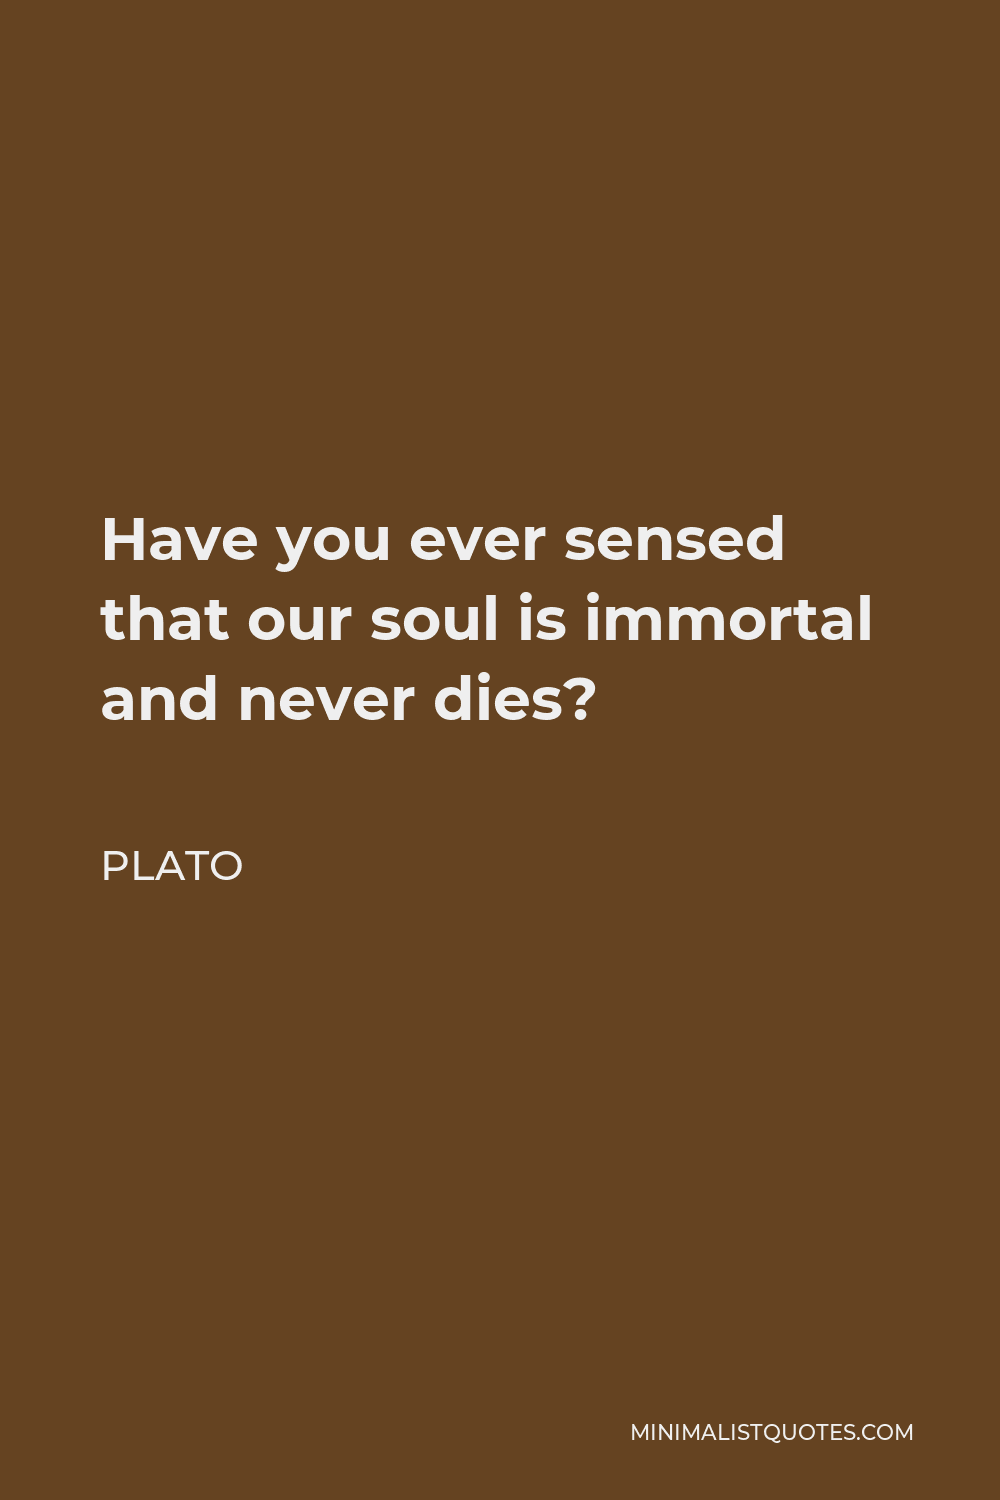 Plato Quote - Have you ever sensed that our soul is immortal and never dies?